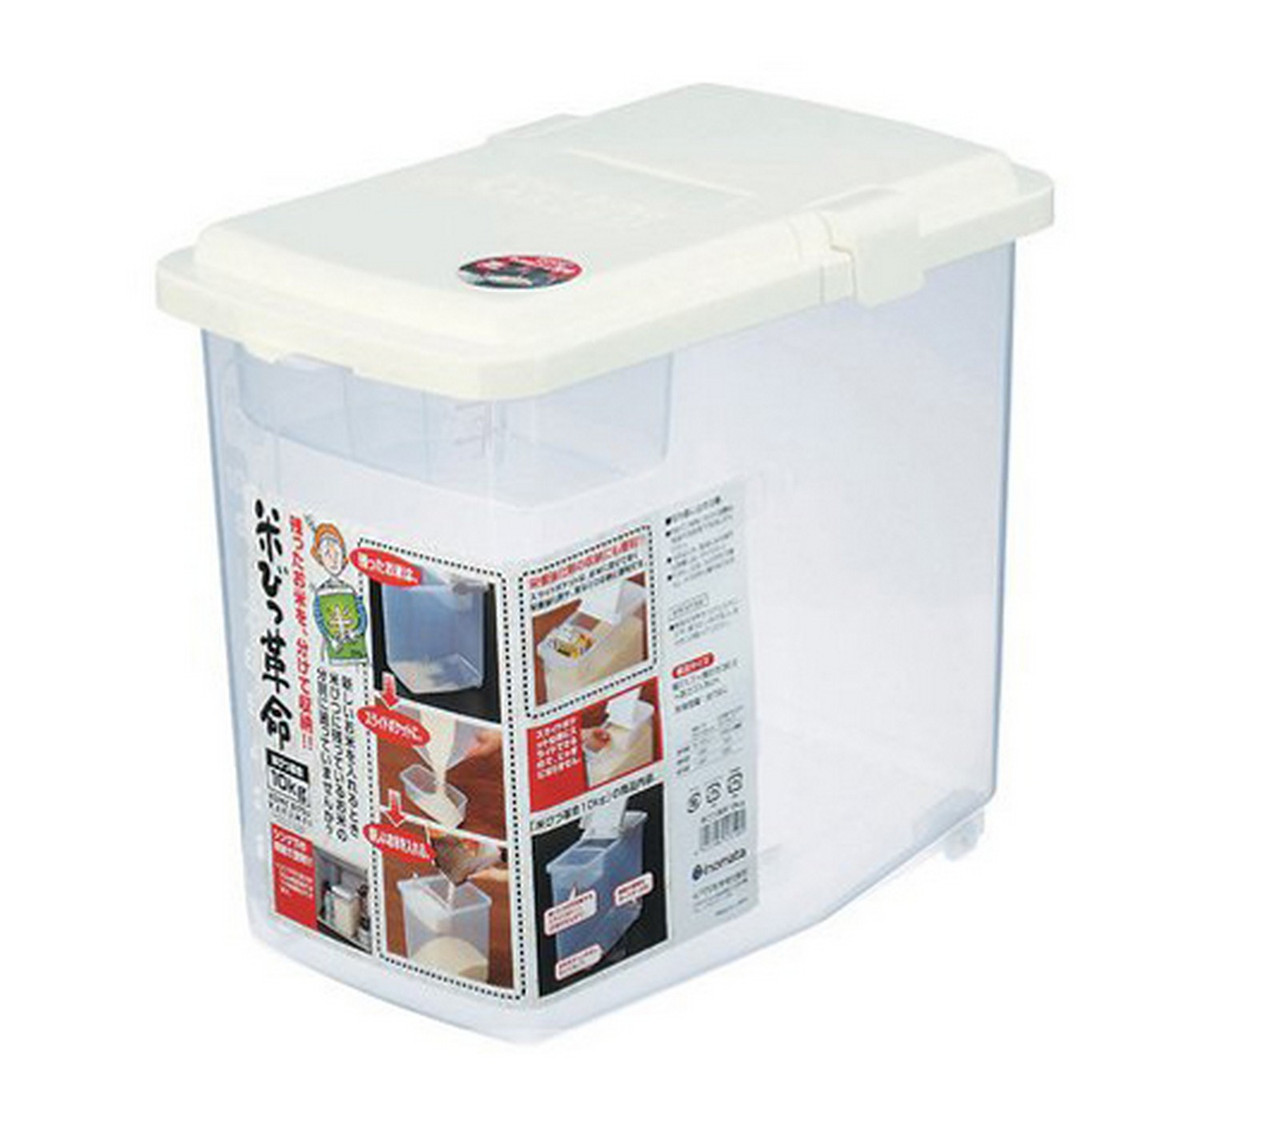 Food Storage Containers Category  Plastic Food Storage Containers